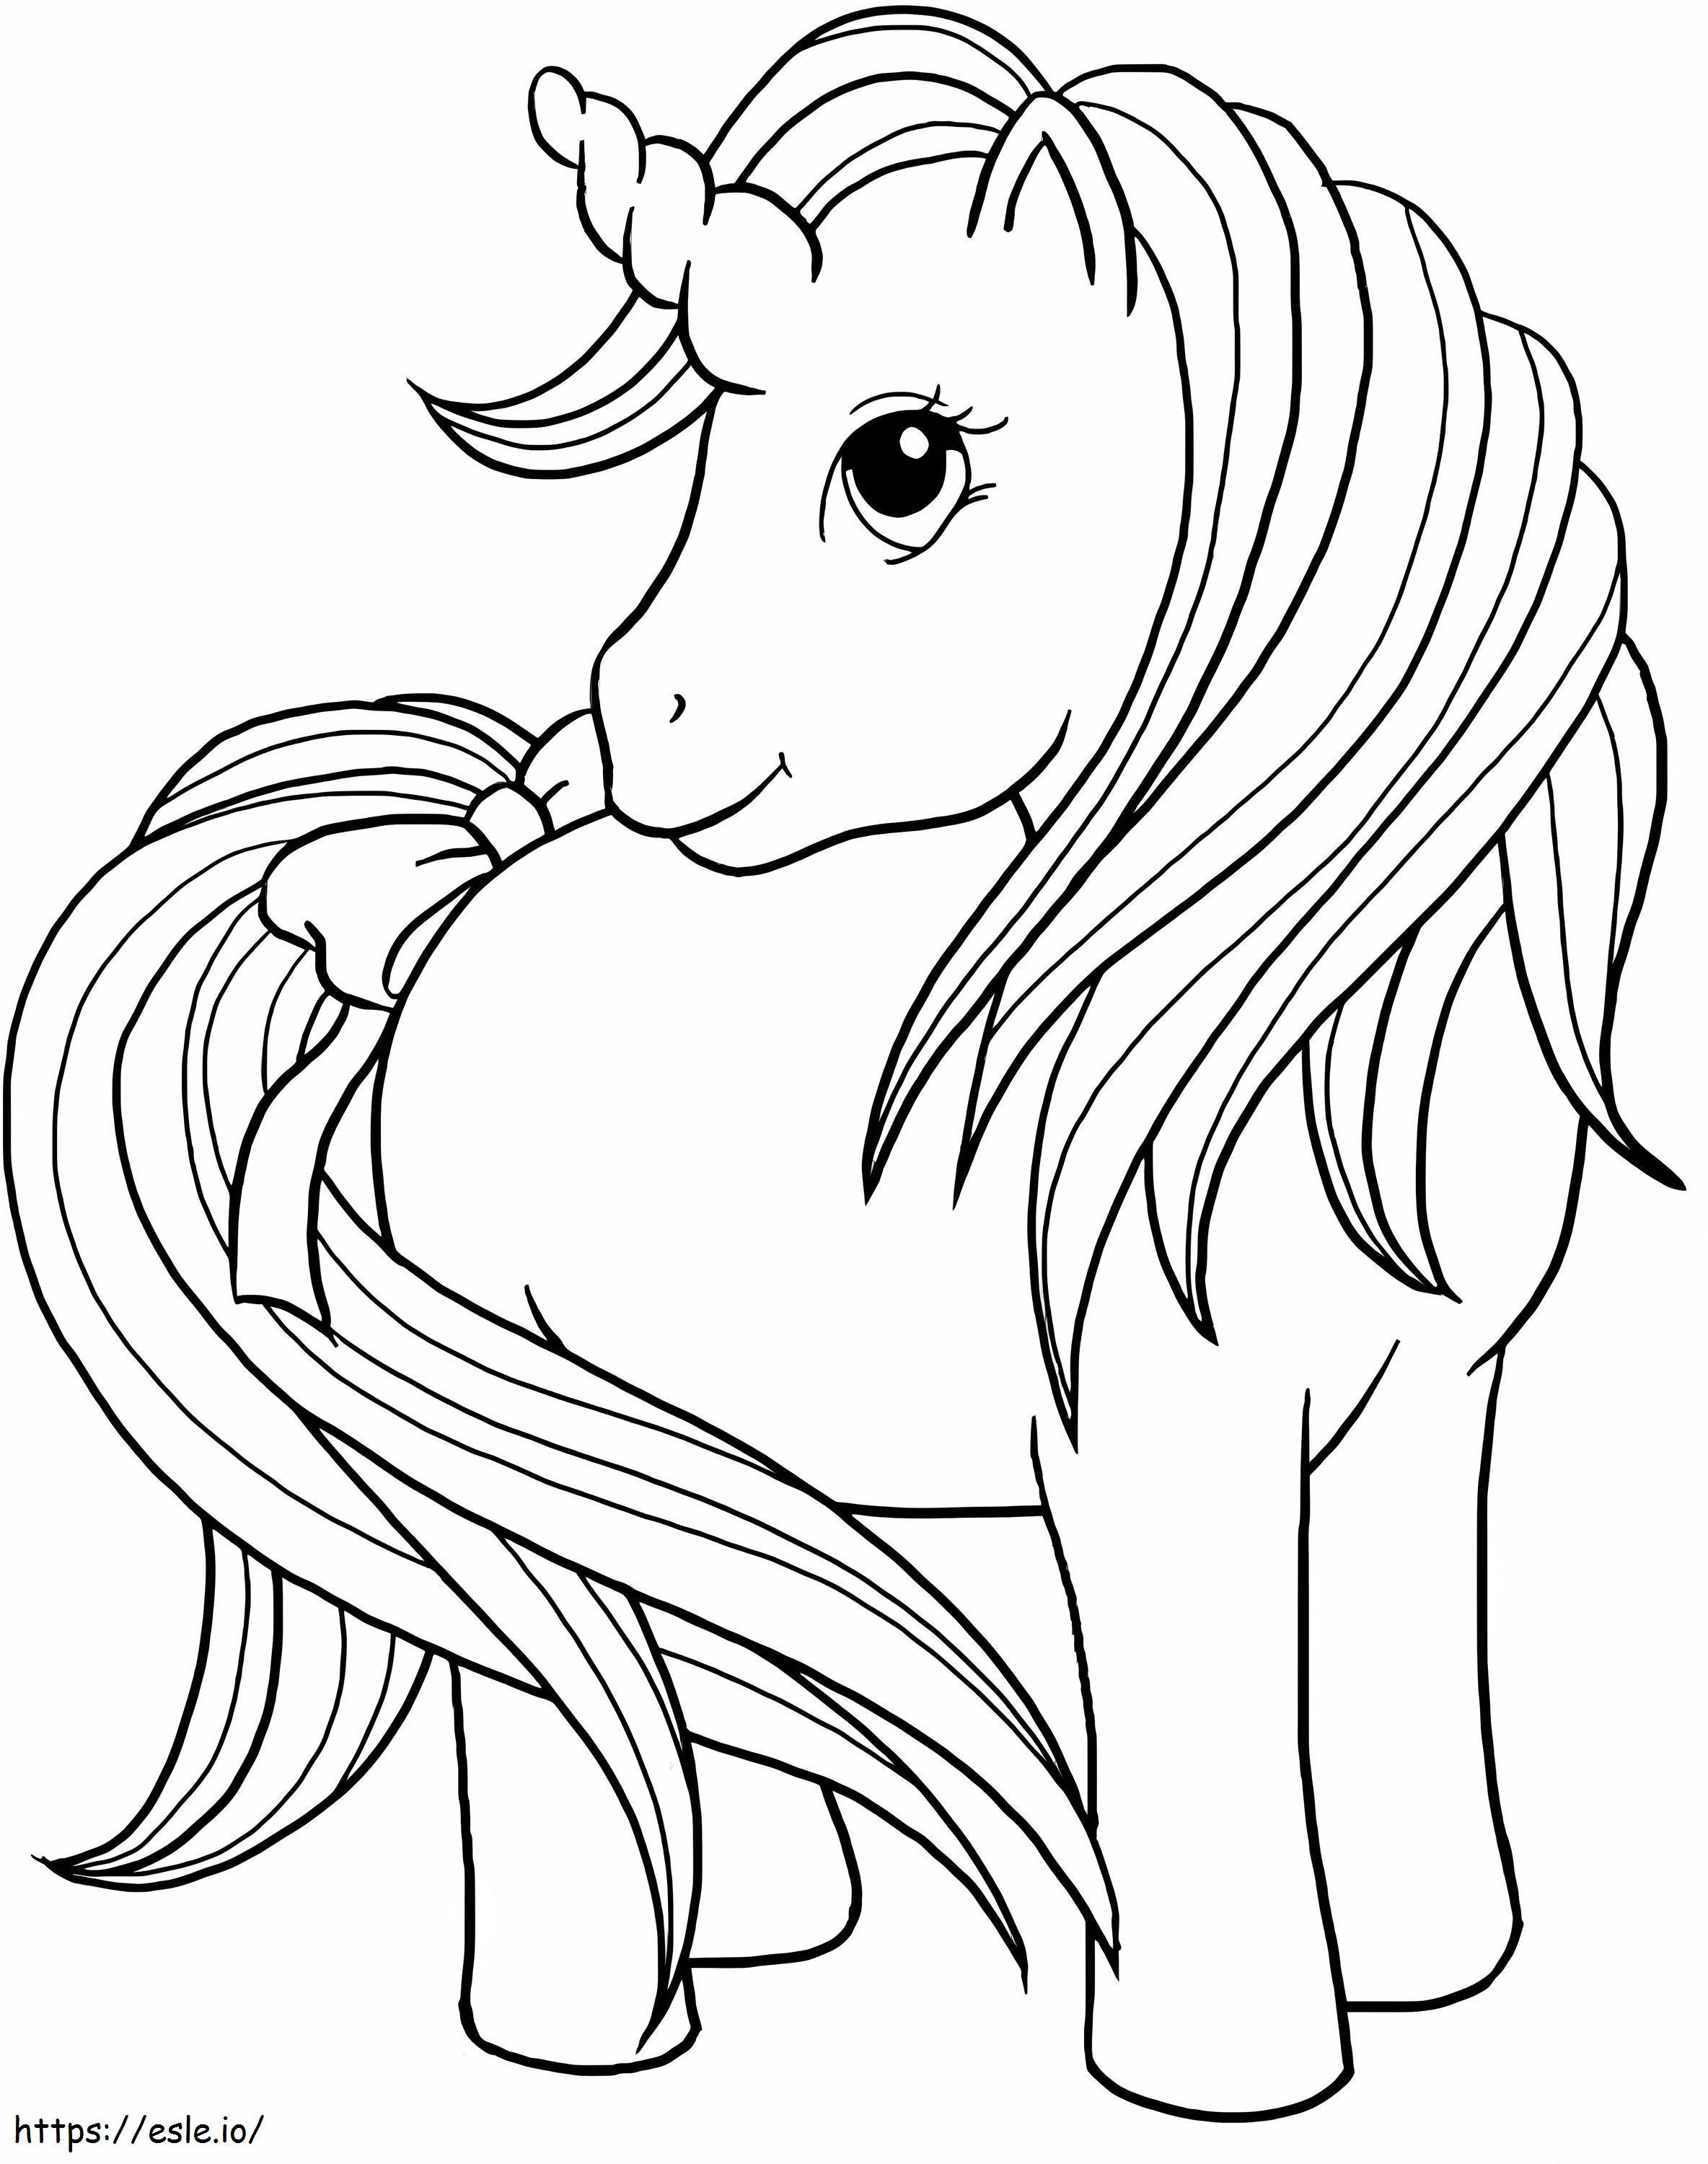 1563498330 Unicorn With Bow At Tail A4 coloring page